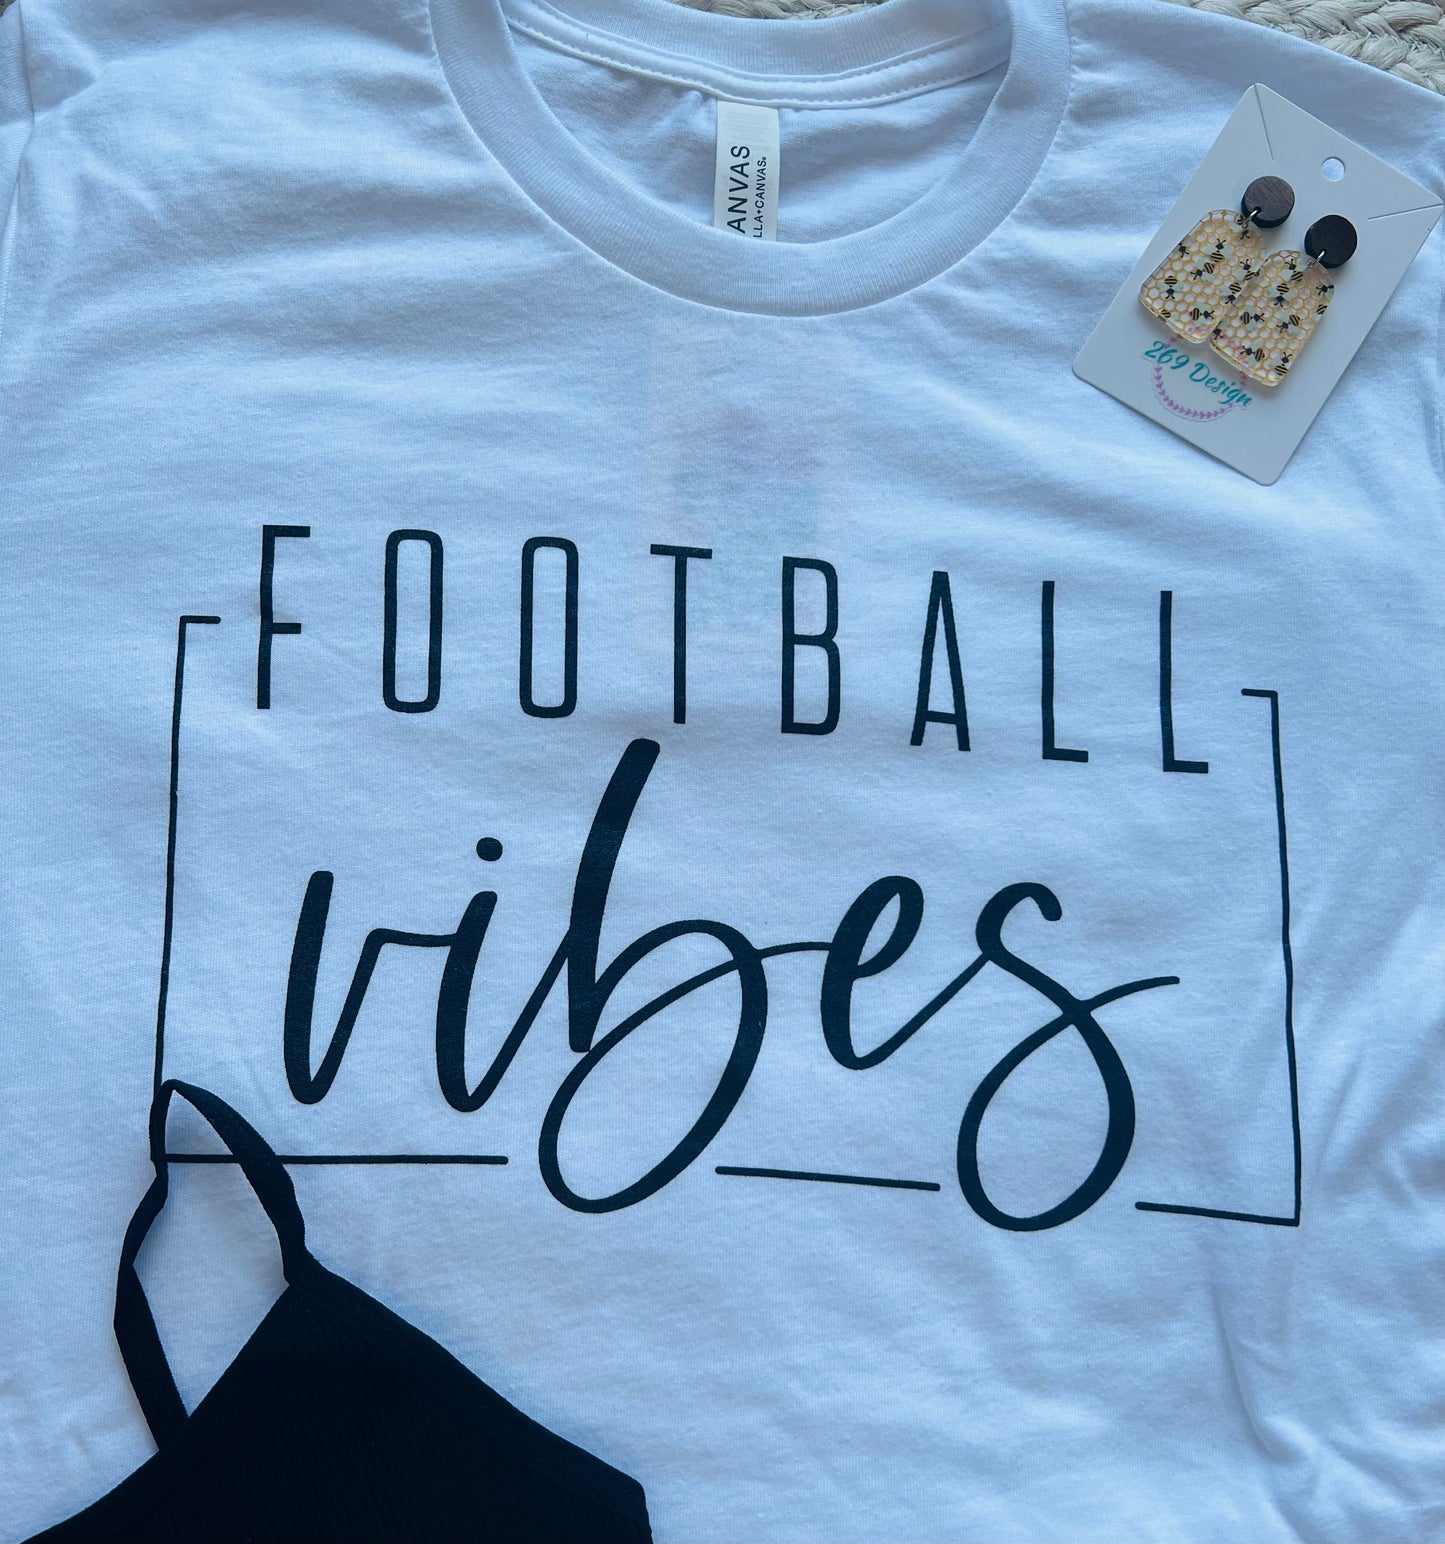 Football Vibes Graphic Tee (S-L)